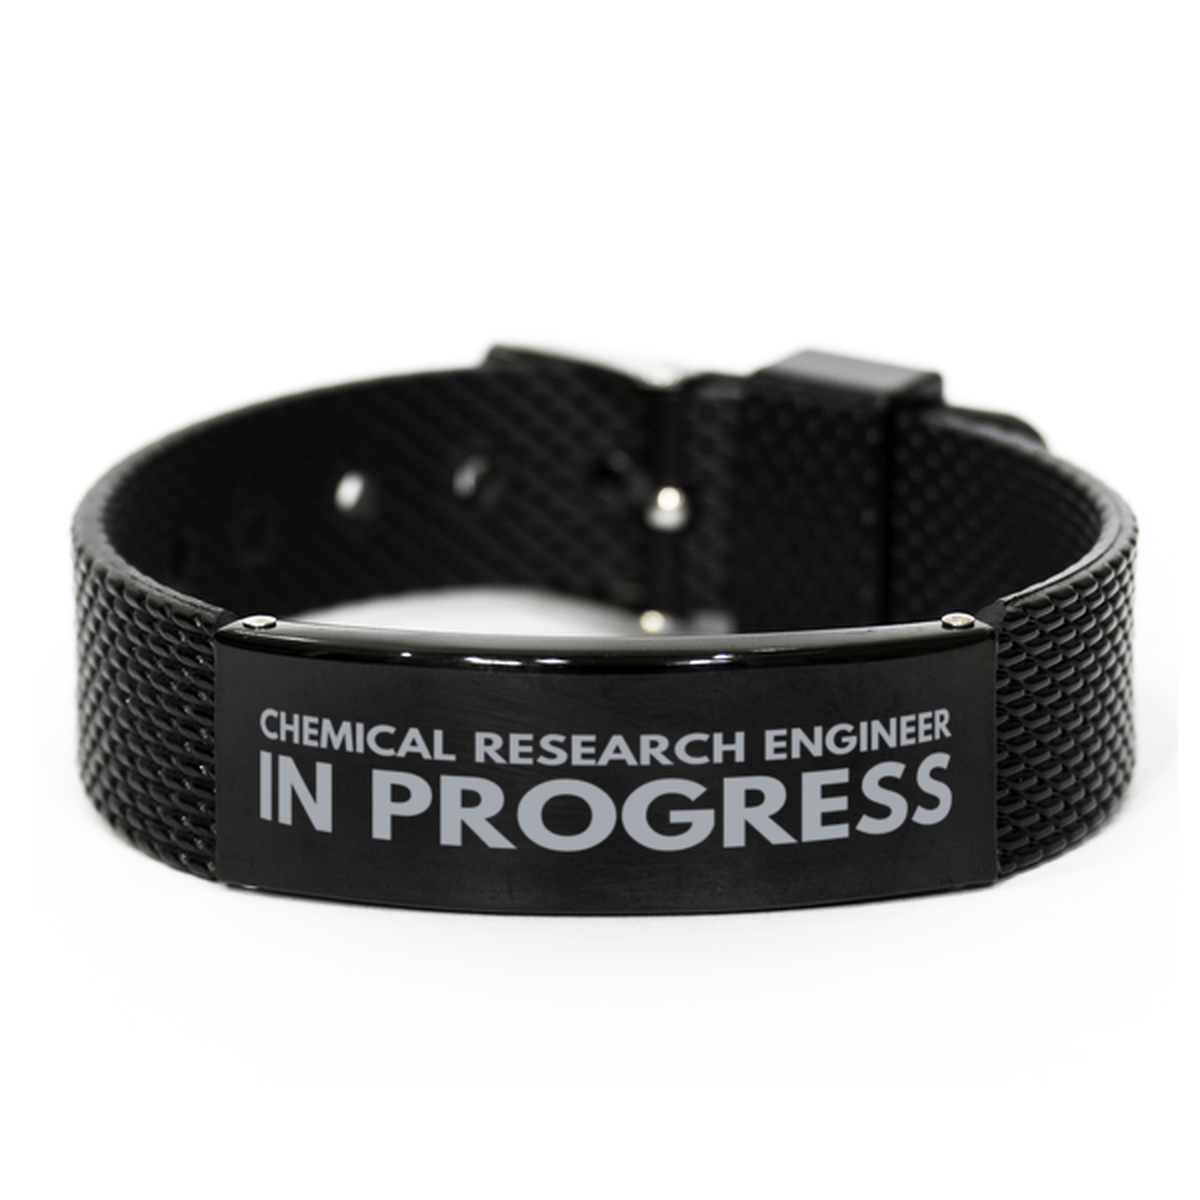 Inspirational Chemical Research Engineer Black Shark Mesh Bracelet, Chemical Research Engineer In Progress, Best Graduation Gifts for Students